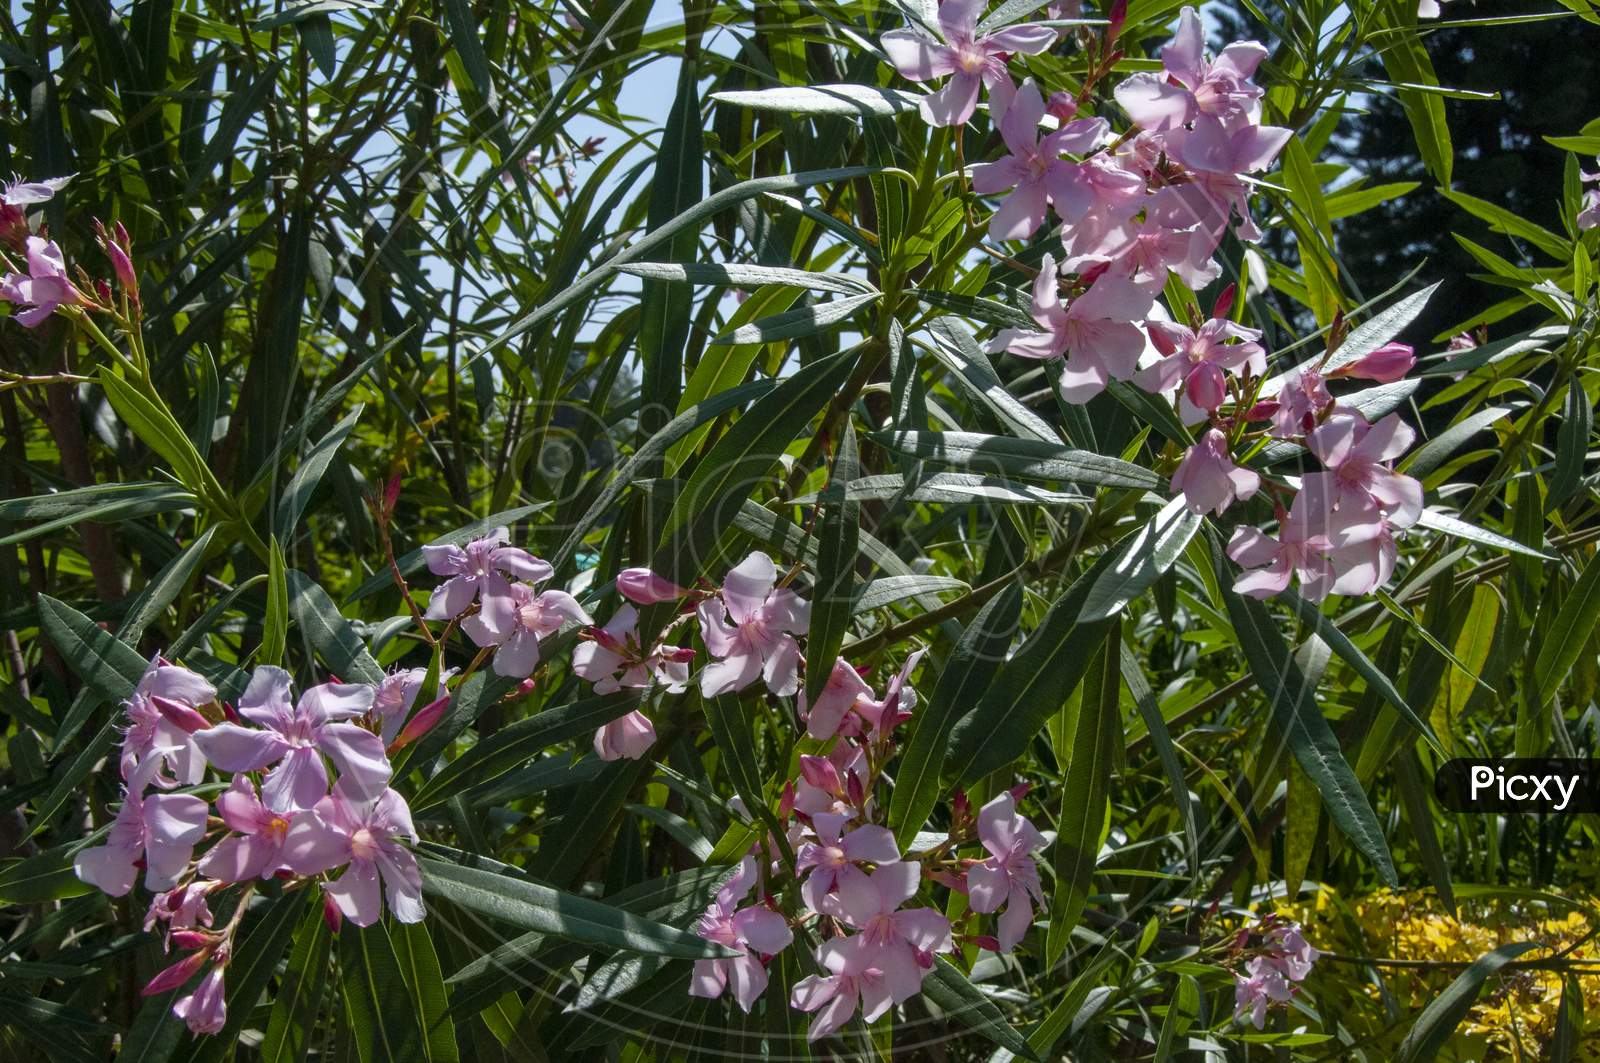 Nerium Oleander Is A Shrub Or Small Tree In The Dogbane Family Apocynaceae, Toxic In All Its Parts